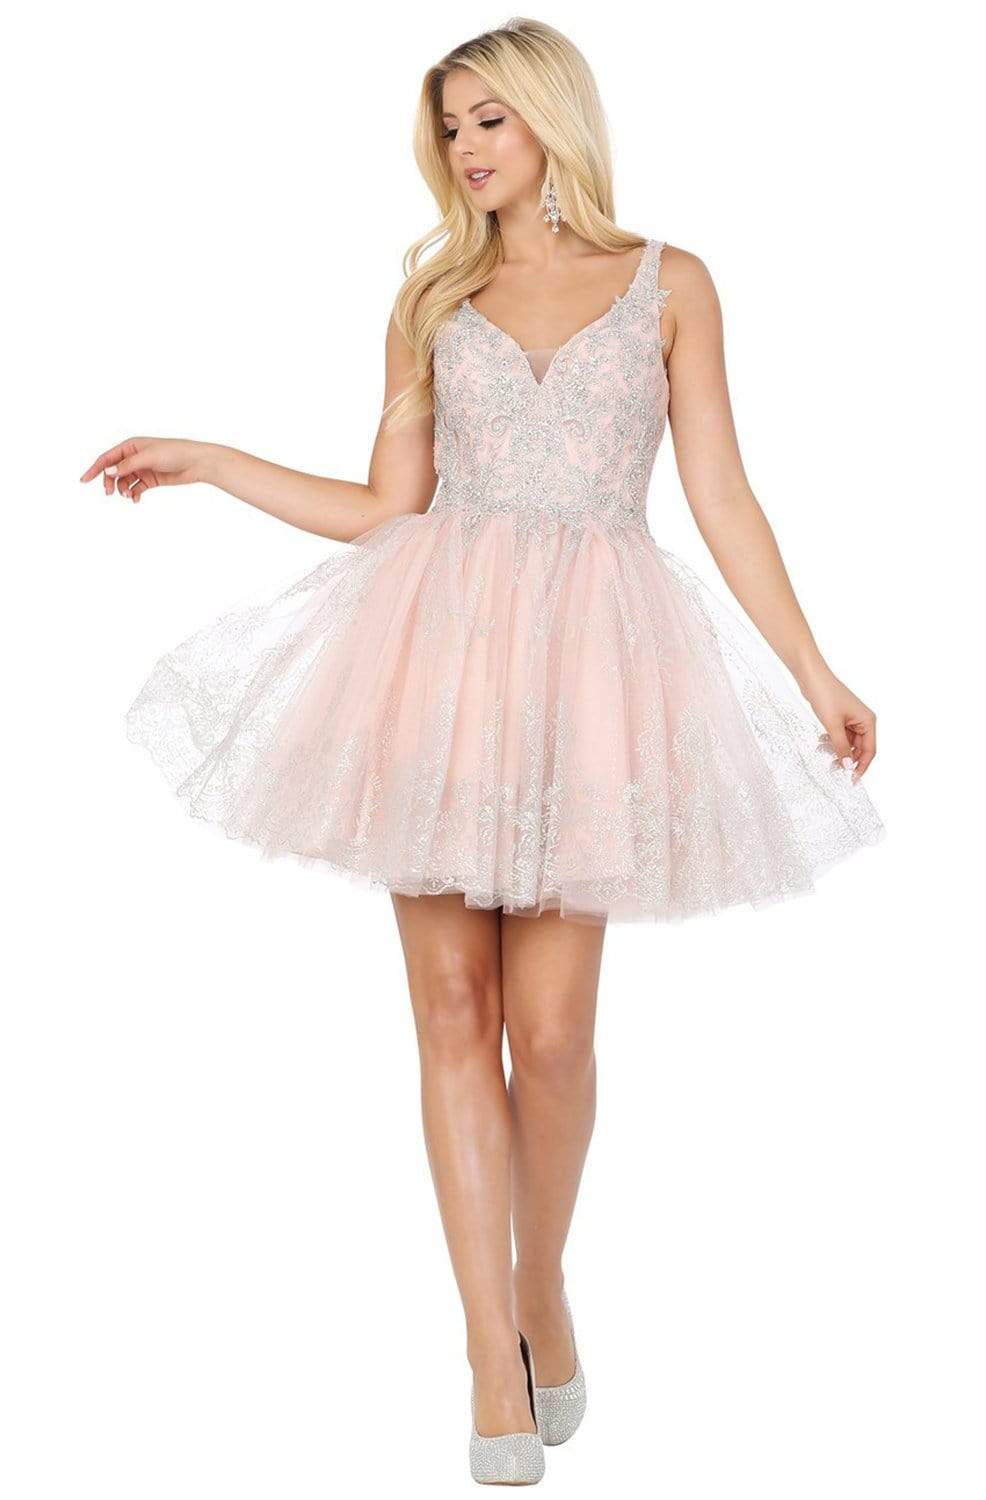 Image of Dancing Queen - 3237 Sleeveless V Neck Lace Applique Cocktail Dress